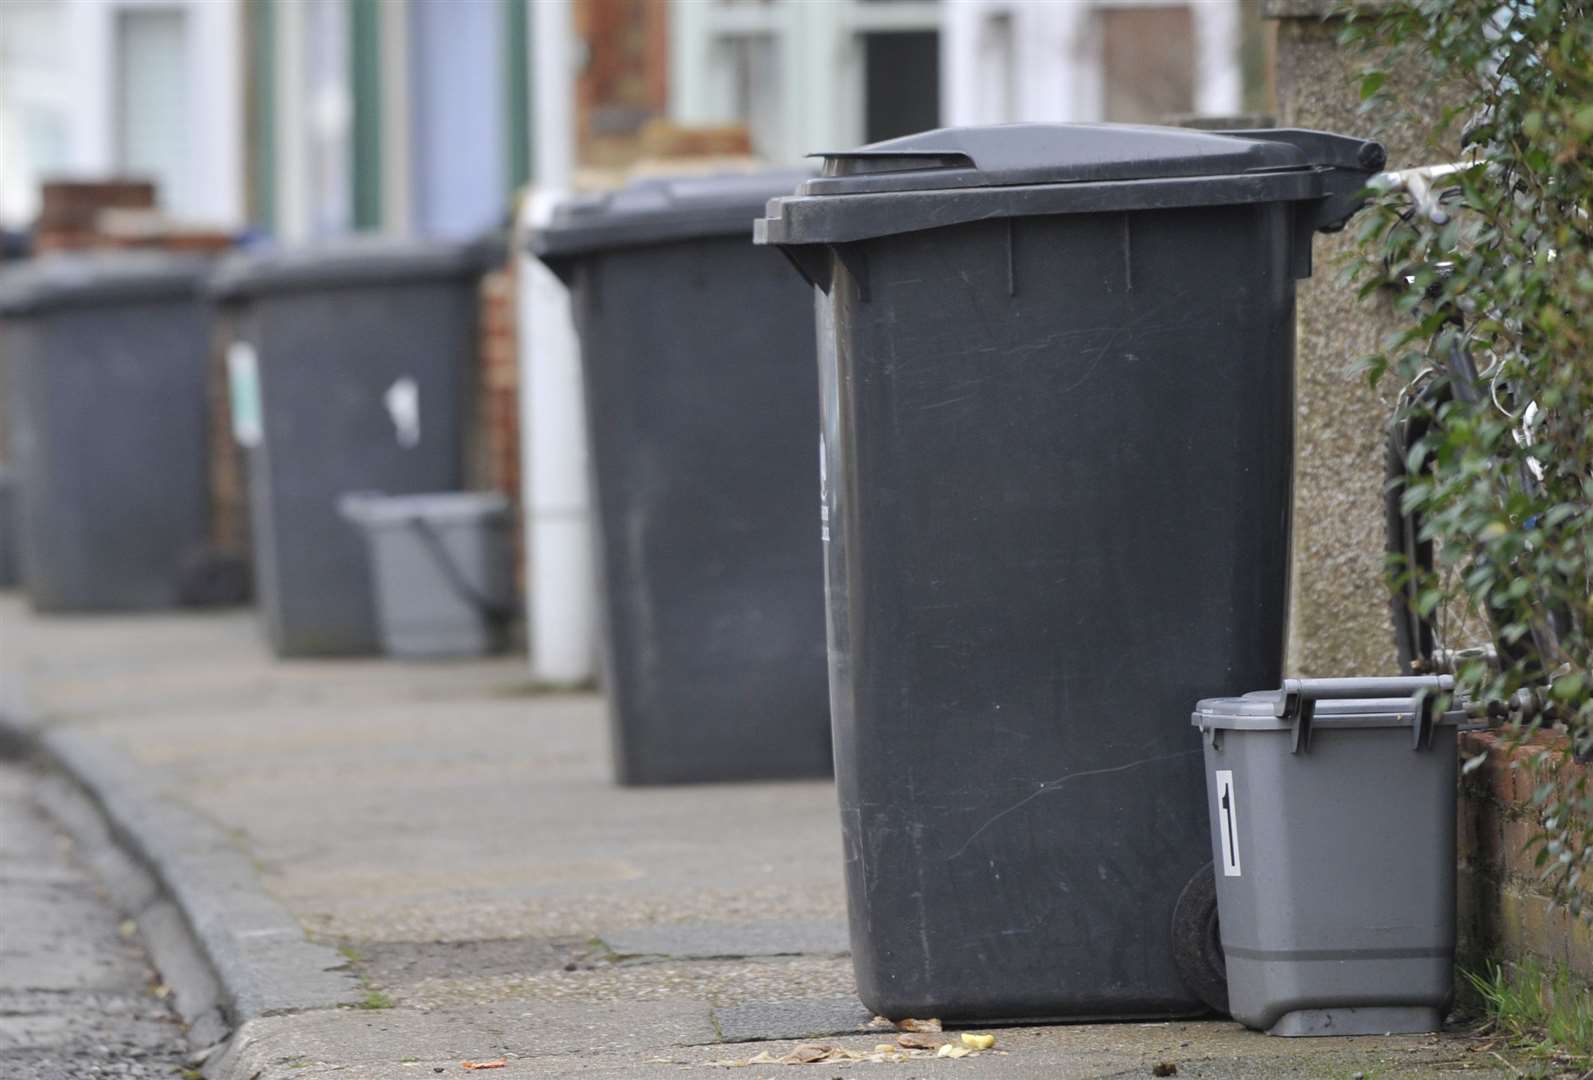 Waste collections are set to be delayed until next week